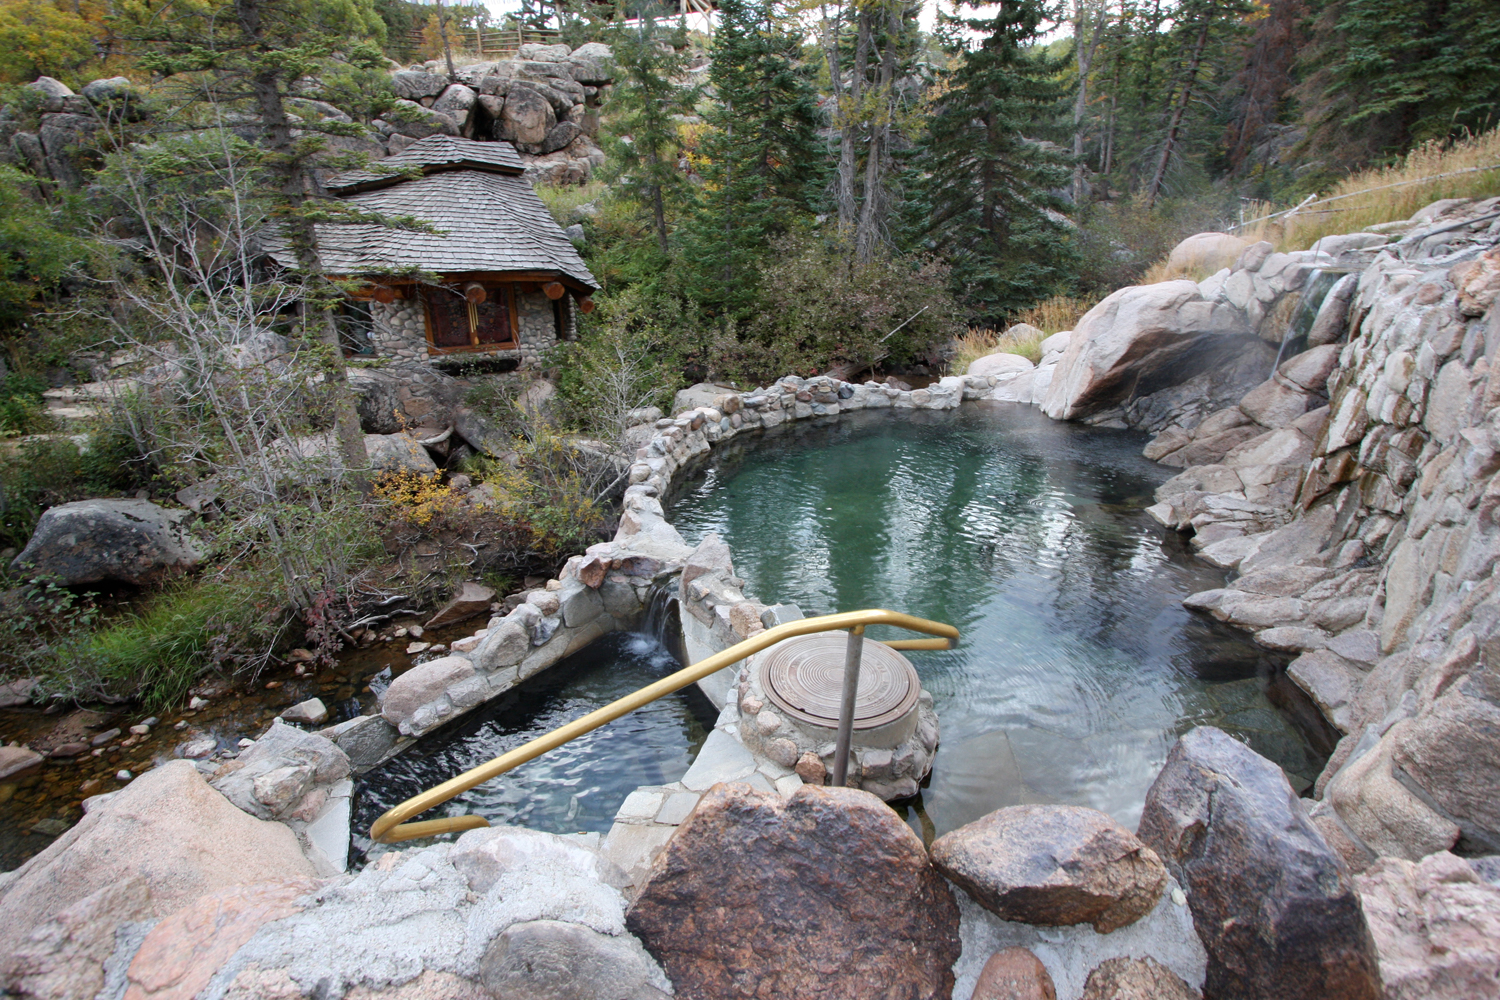 Strawberry Park Hot Springs is located outside of Steamboat Springs, Colorado